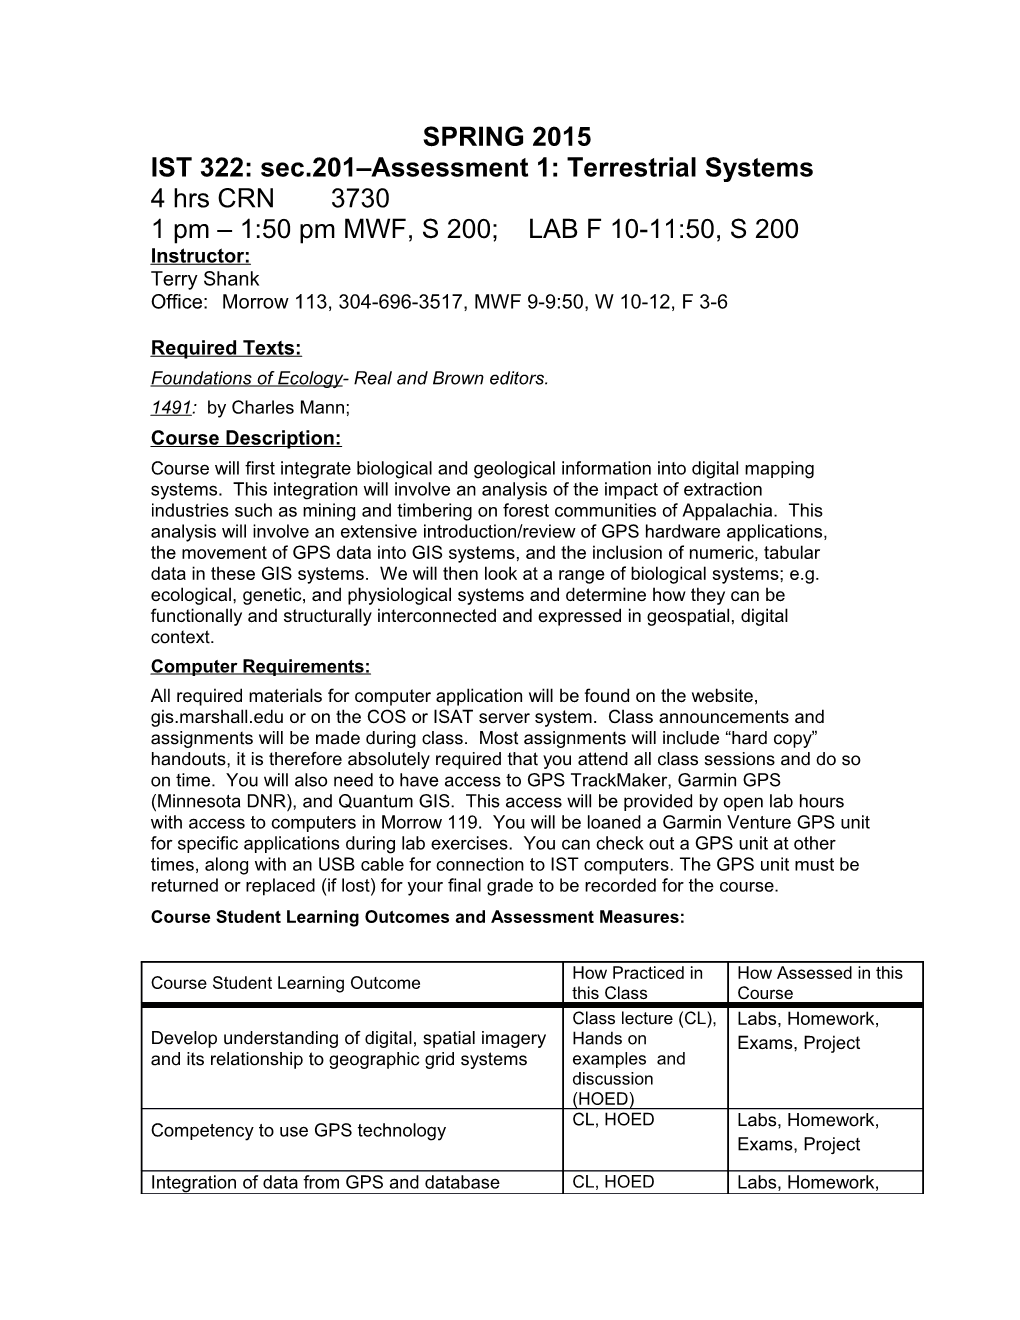 IST 322: Sec.201 Assessment 1: Terrestrial Systems